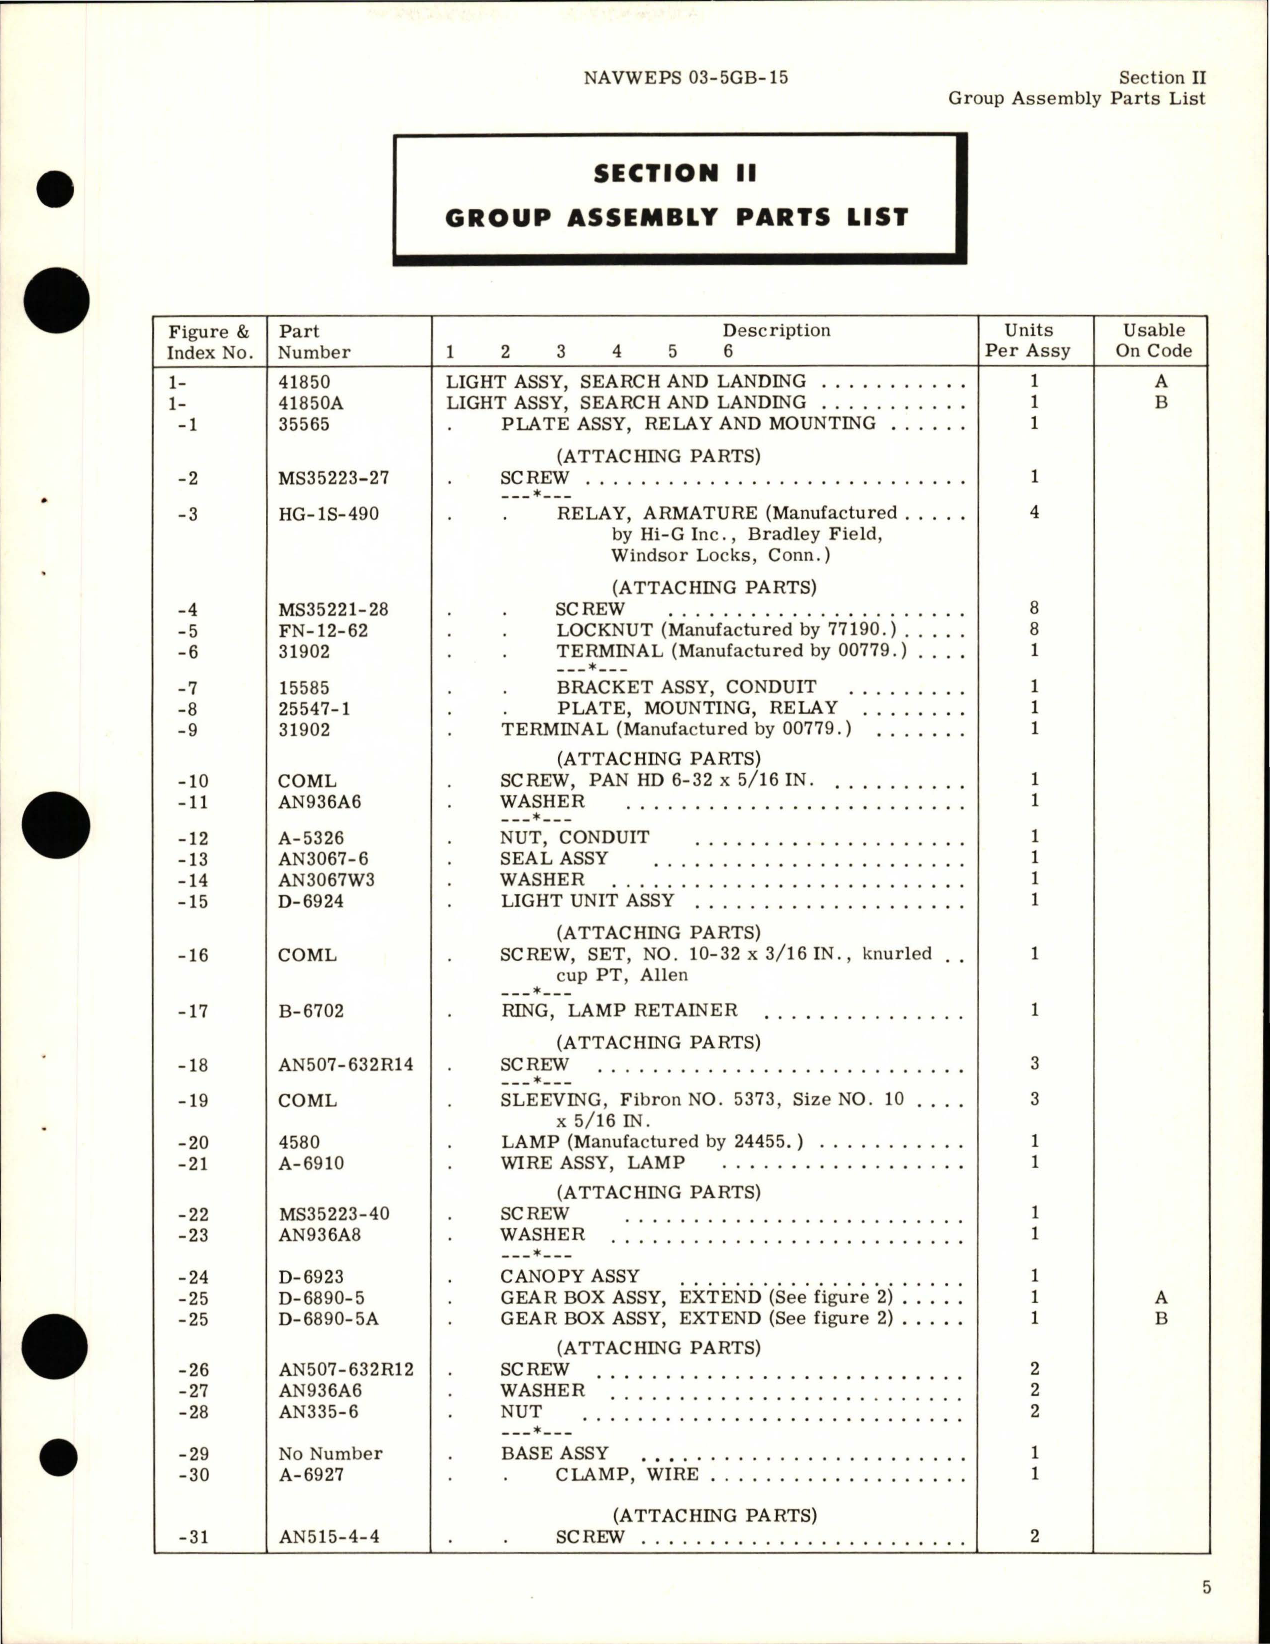 Sample page 9 from AirCorps Library document: Illustrated Parts Breakdown for Search & Landing Light Assembly - Parts 41850 and 41850A 